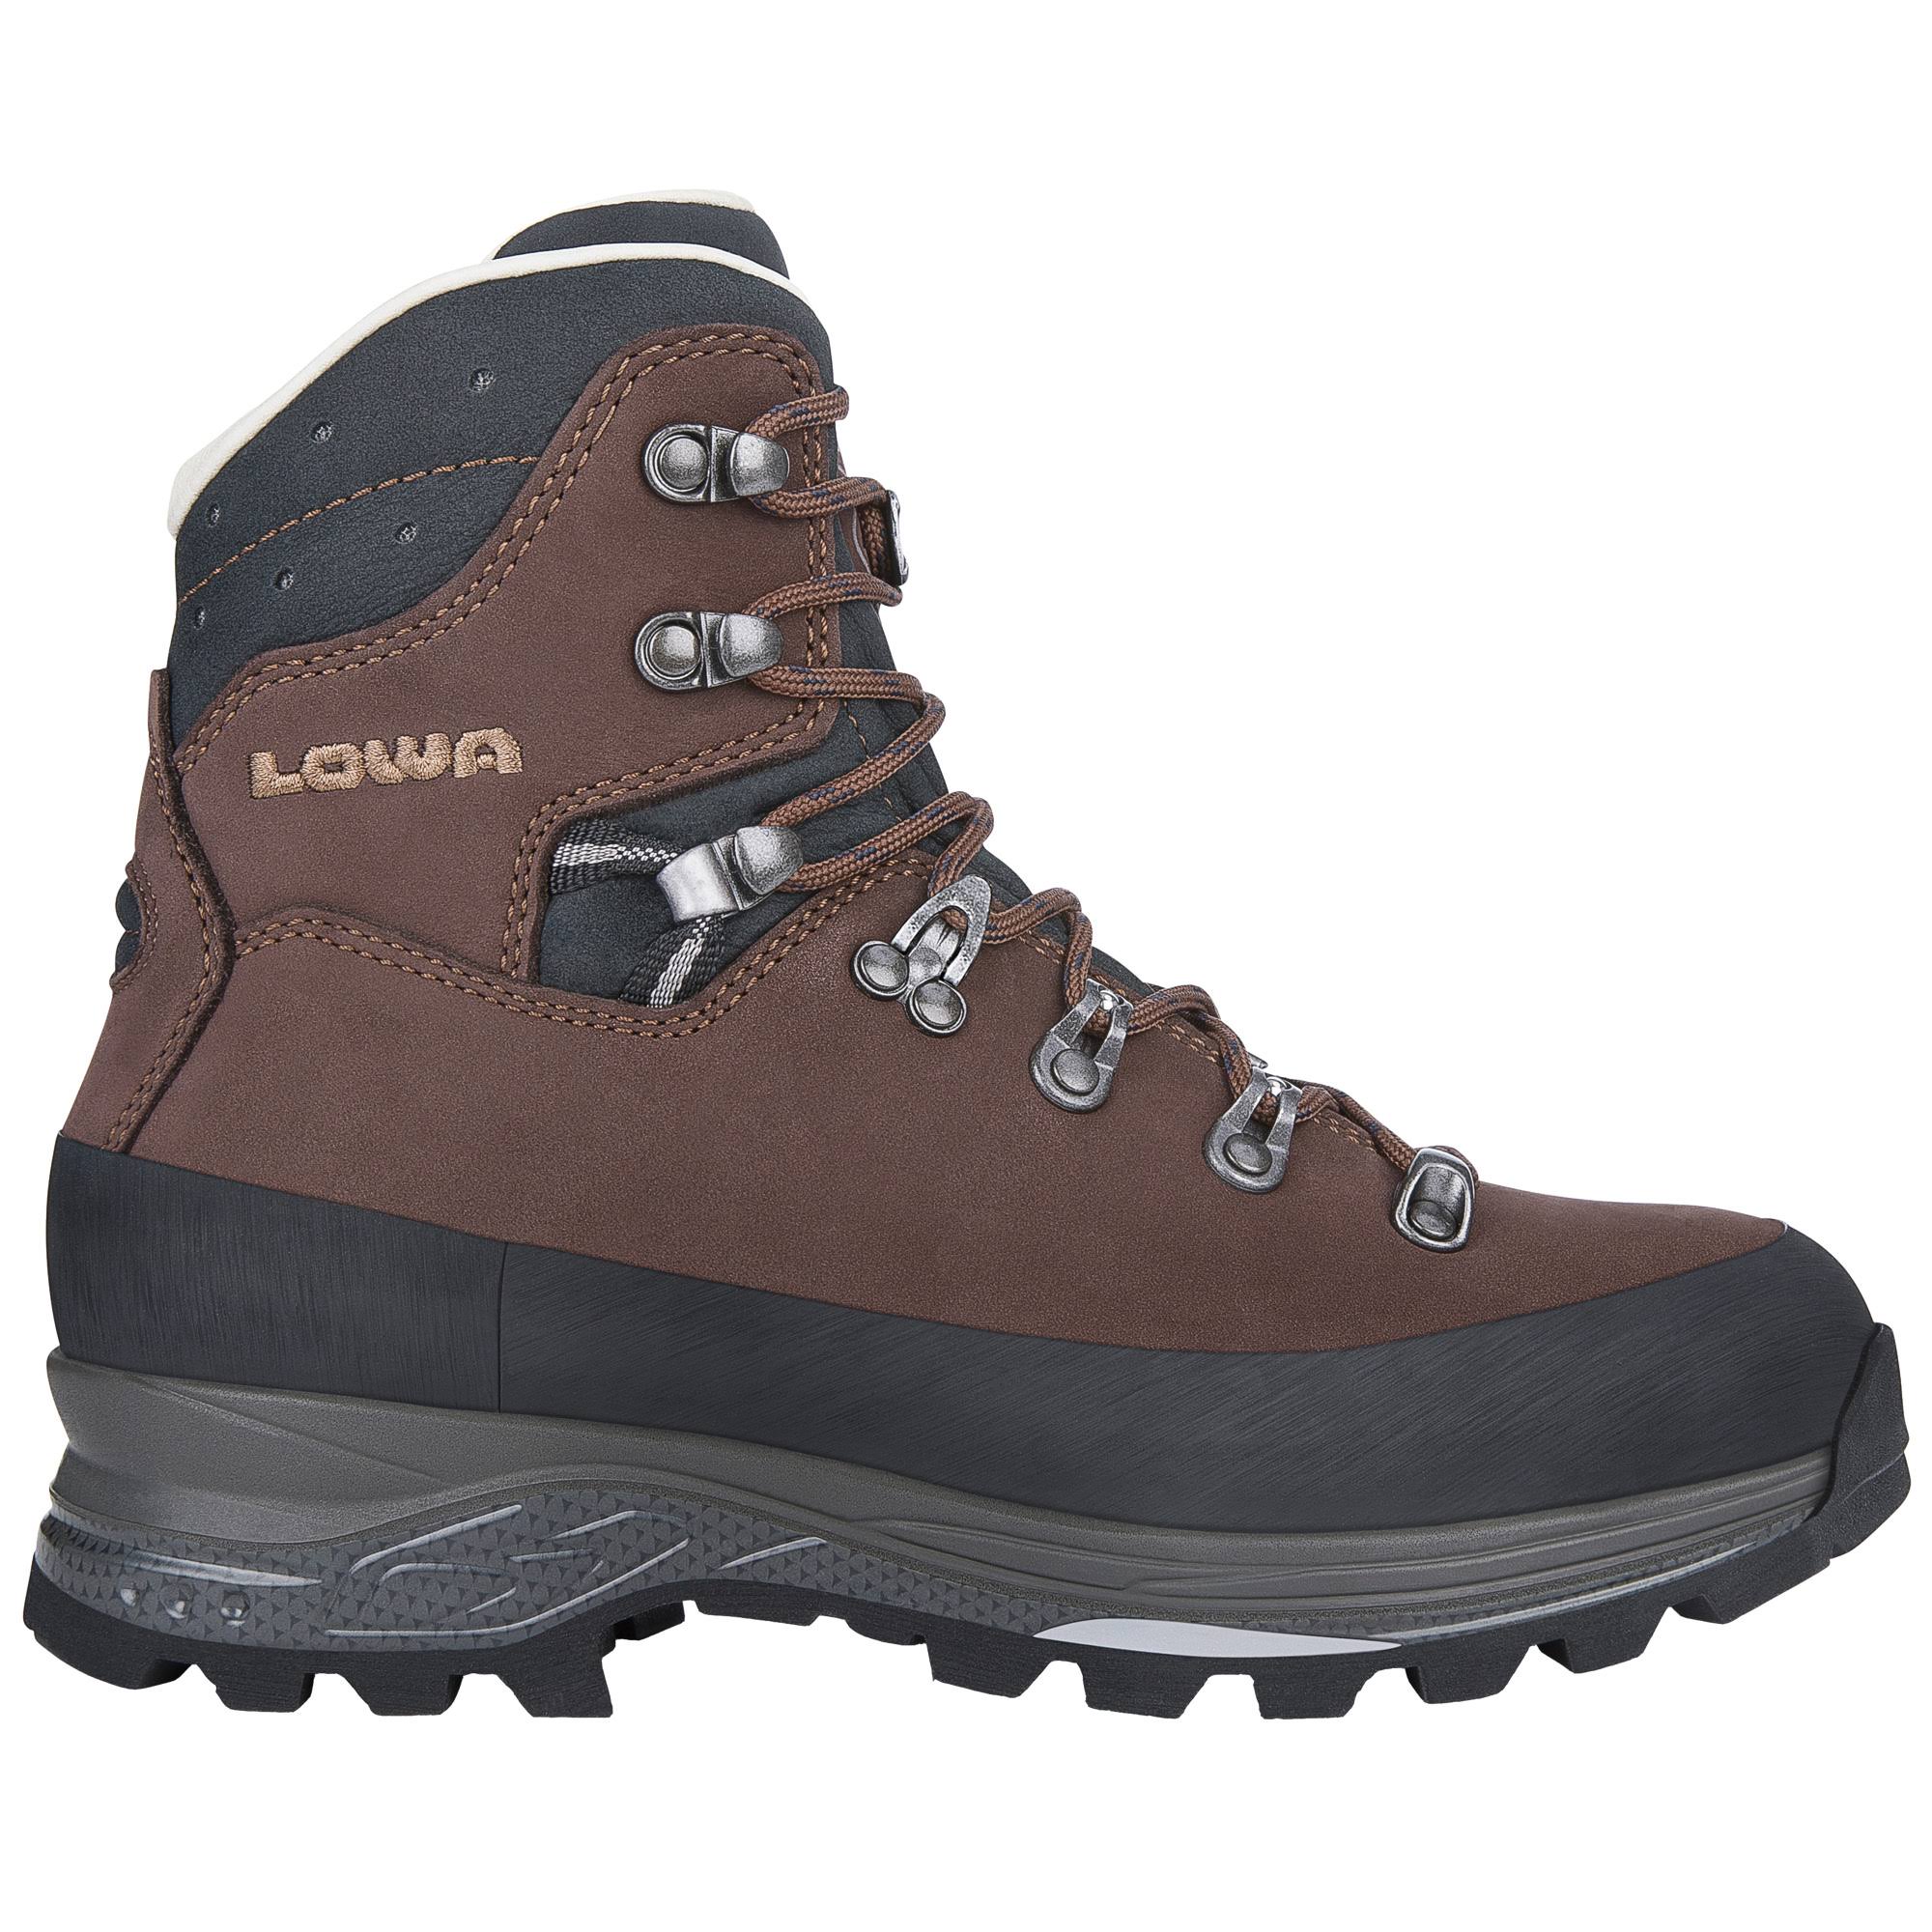 Chestnut/Navy Lowa Women's Baffin Pro LL II Backpacking Boots - 8.5